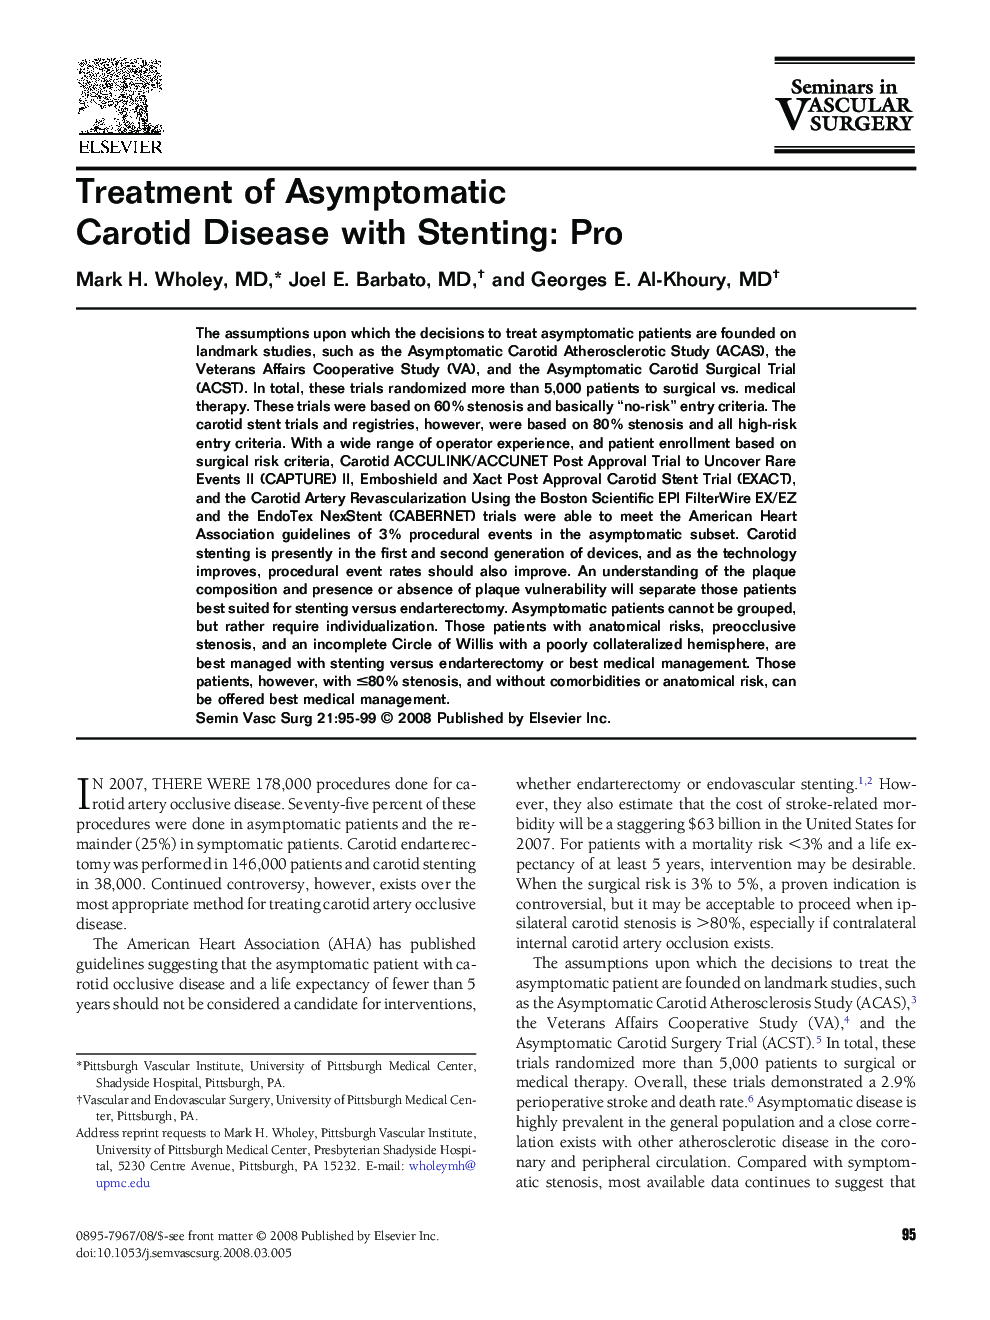 Treatment of Asymptomatic Carotid Disease with Stenting: Pro